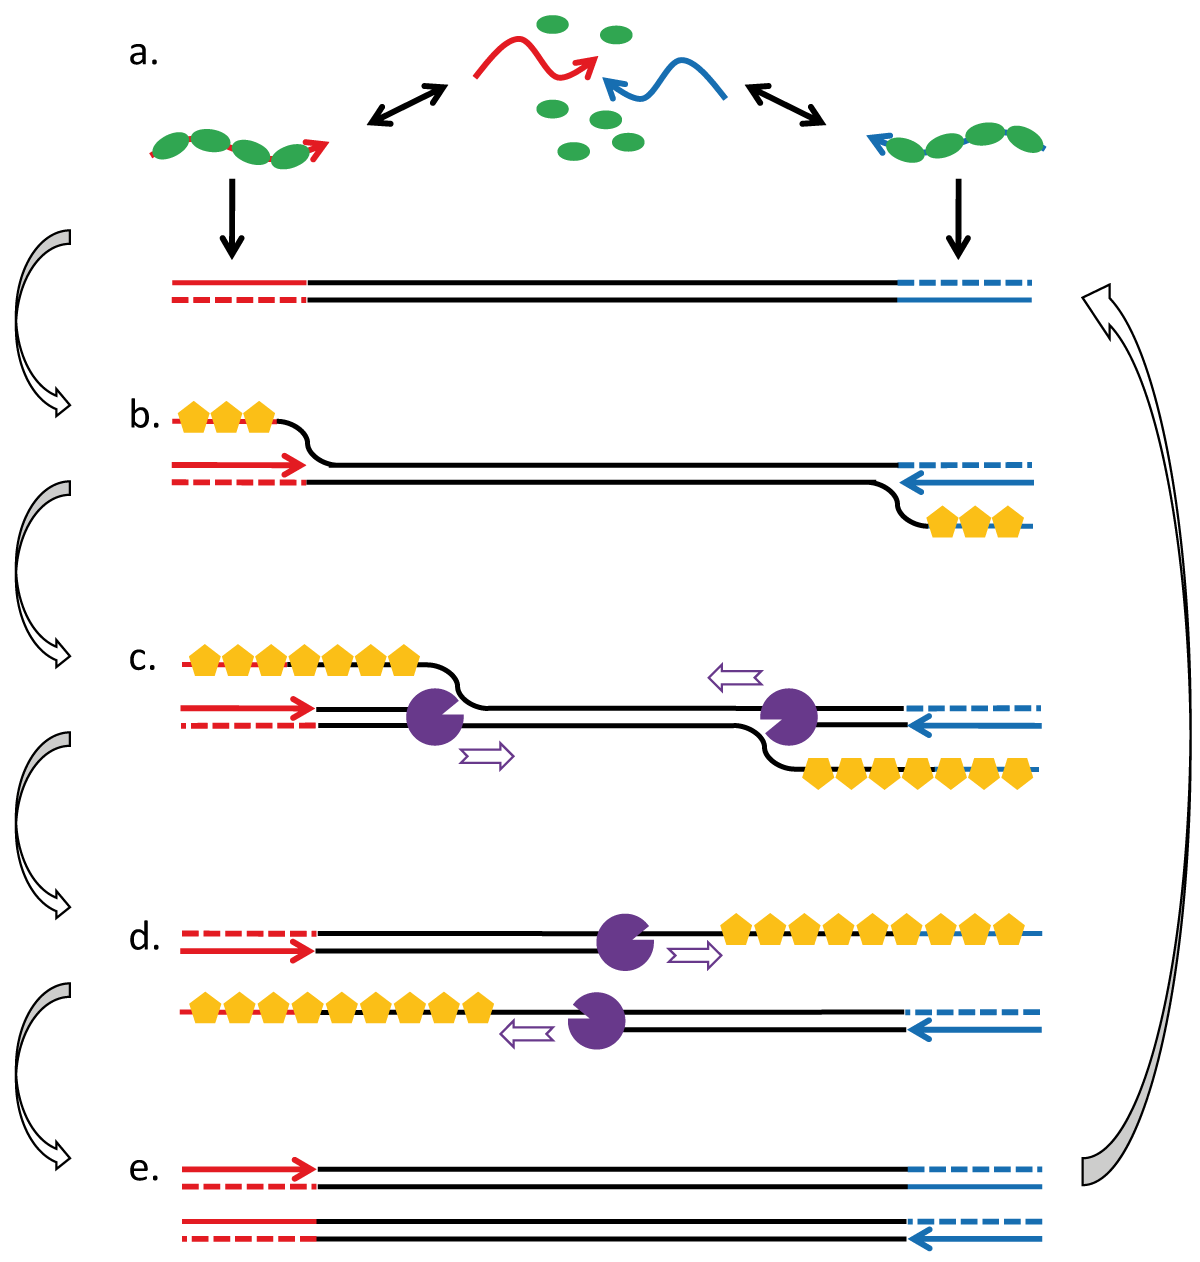 Fig. 1: RPA employs enzymes, known as recombinases (green), that are capable of interacting with amplification primers (red and blue arrows) and pairing them with homologous sequence in duplex DNA (indicated sections of black double line; a). Strand exchange and ‘D-loop’ formation is assisted by binding of single-strand DNA-binding protein (yellow) to the displaced strand (b). The 3’ ends of the oligonucleotides are extended by strand displacing polymerases (purple), thereby copying the displaced strand (c, d). Both, the original template and the copy are then targets for subsequent recombination/ extension events and an exponential amplification reaction is initiated (e). Using two gene-specific primers, the recombinase-driven RPA process ensures that DNA synthesis is directed only to defined target sites in a given template molecule.